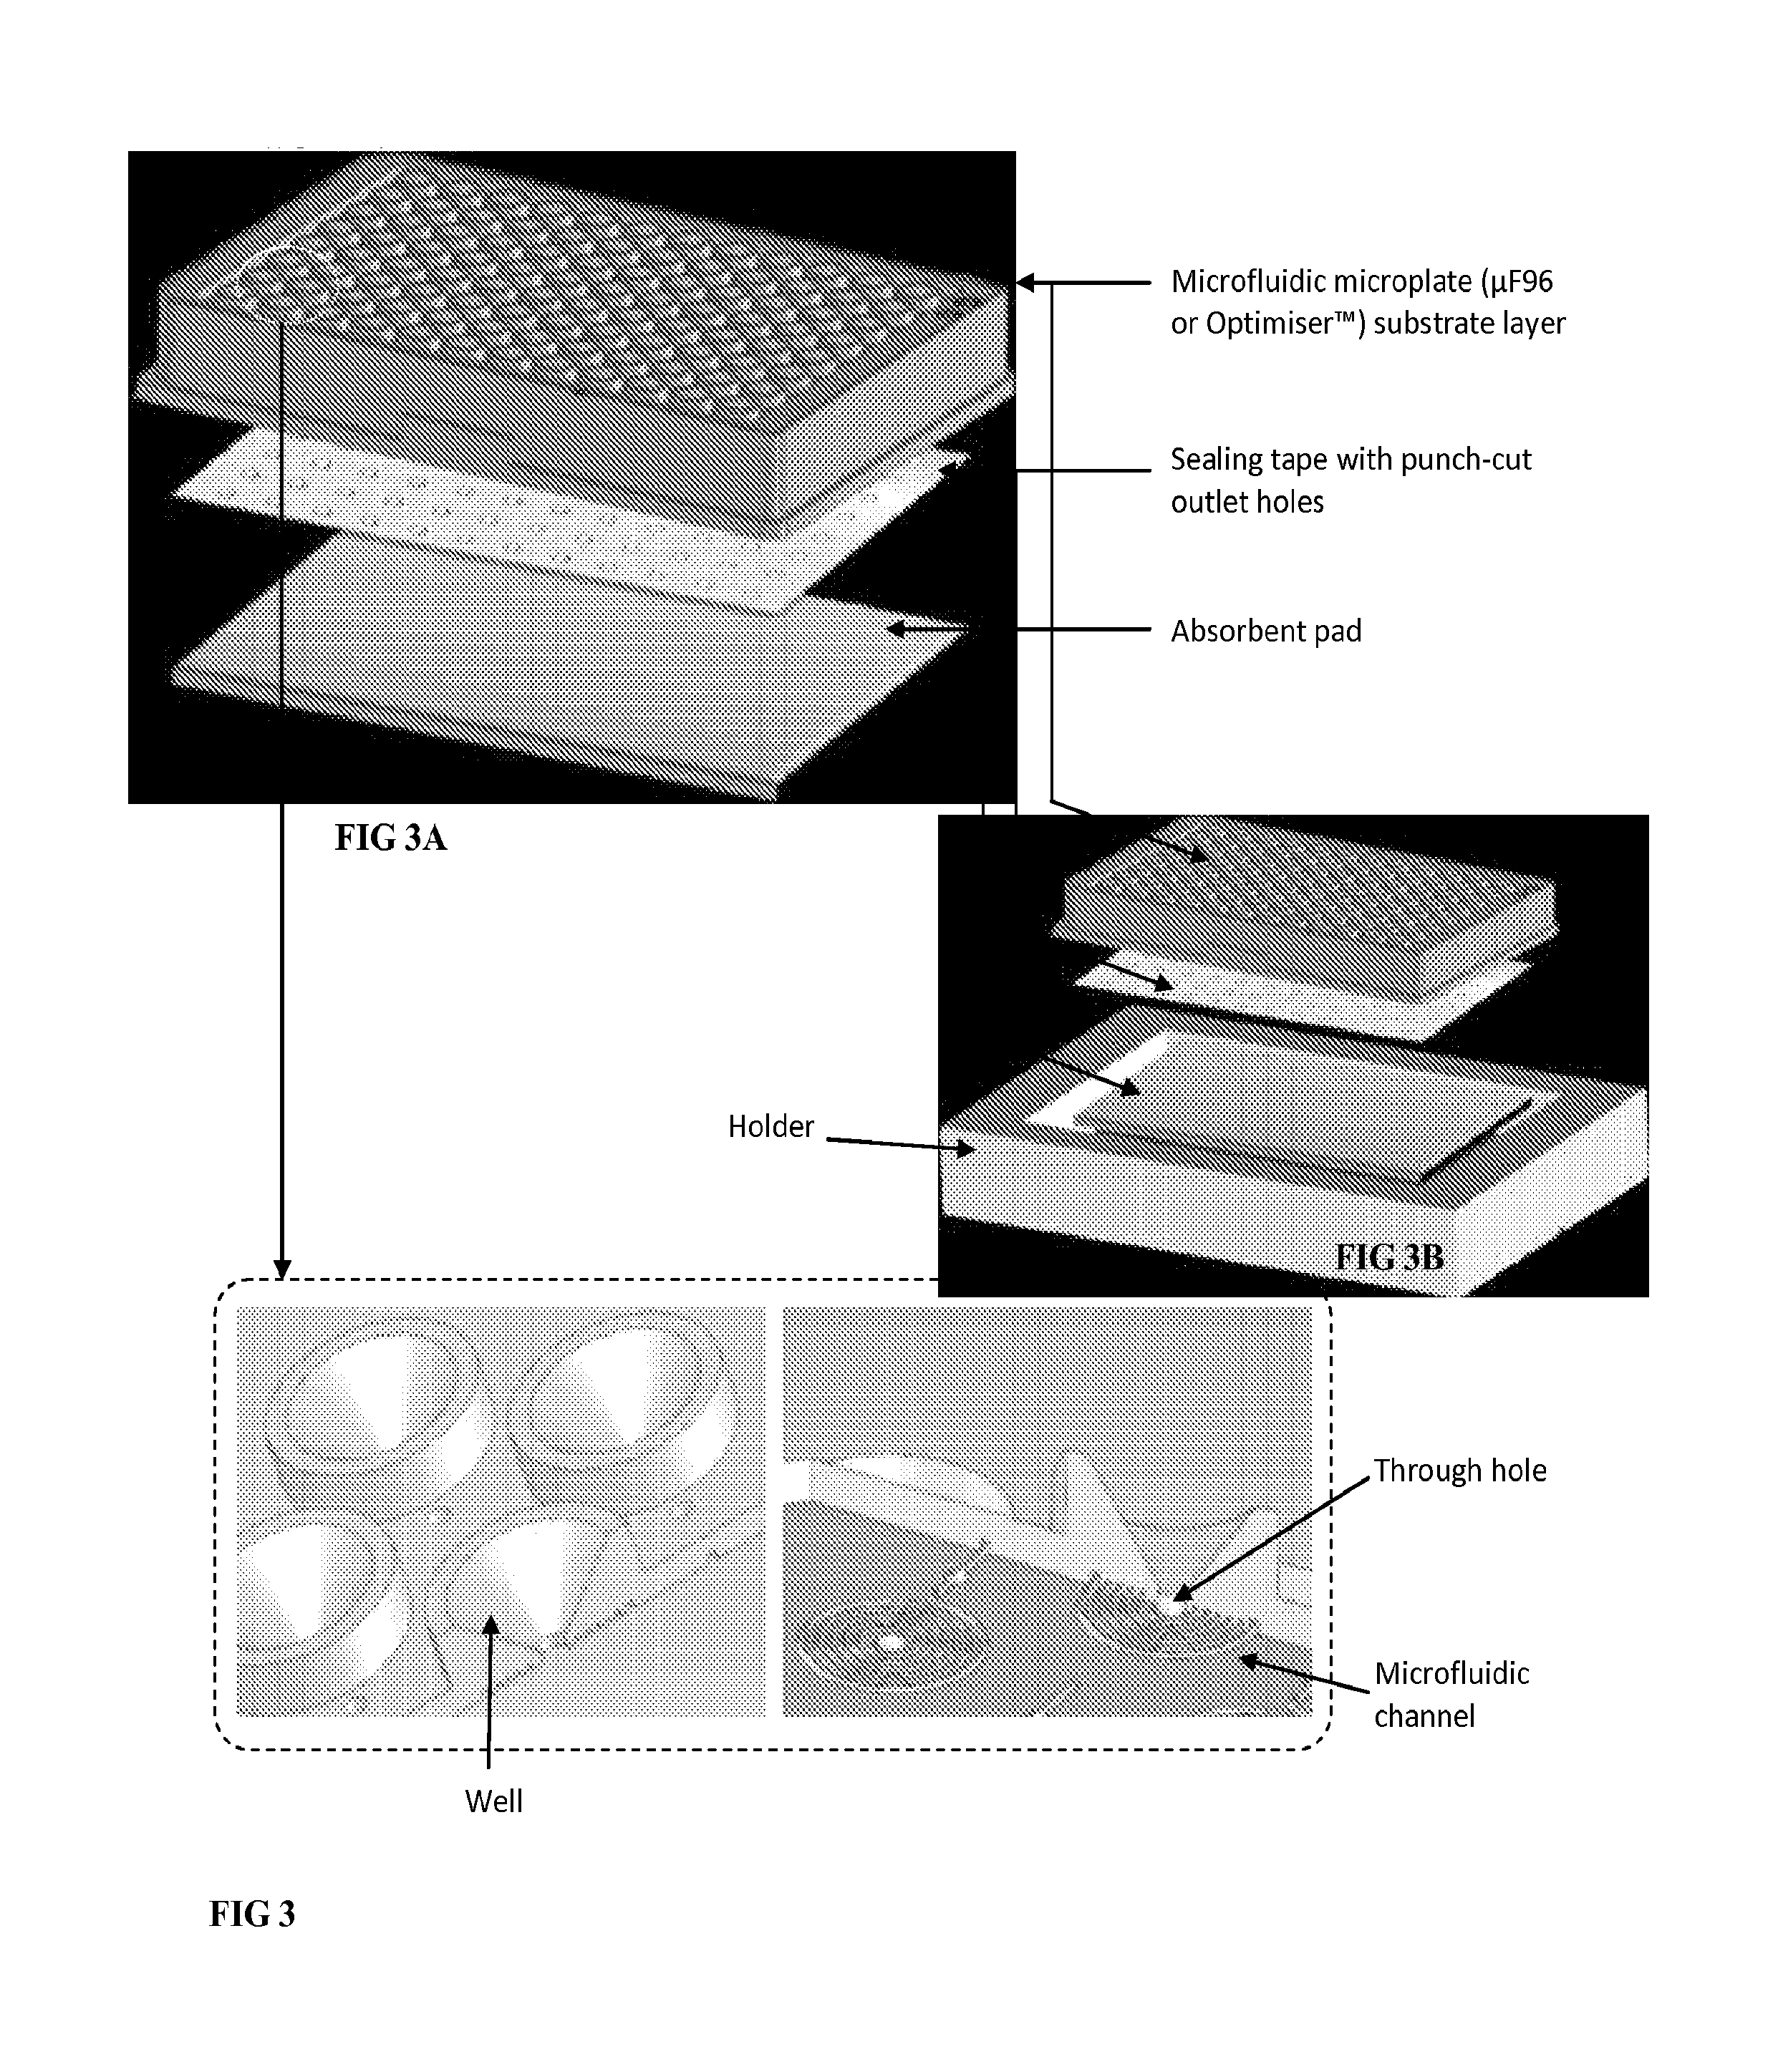 Microfluidic assay devices and methods